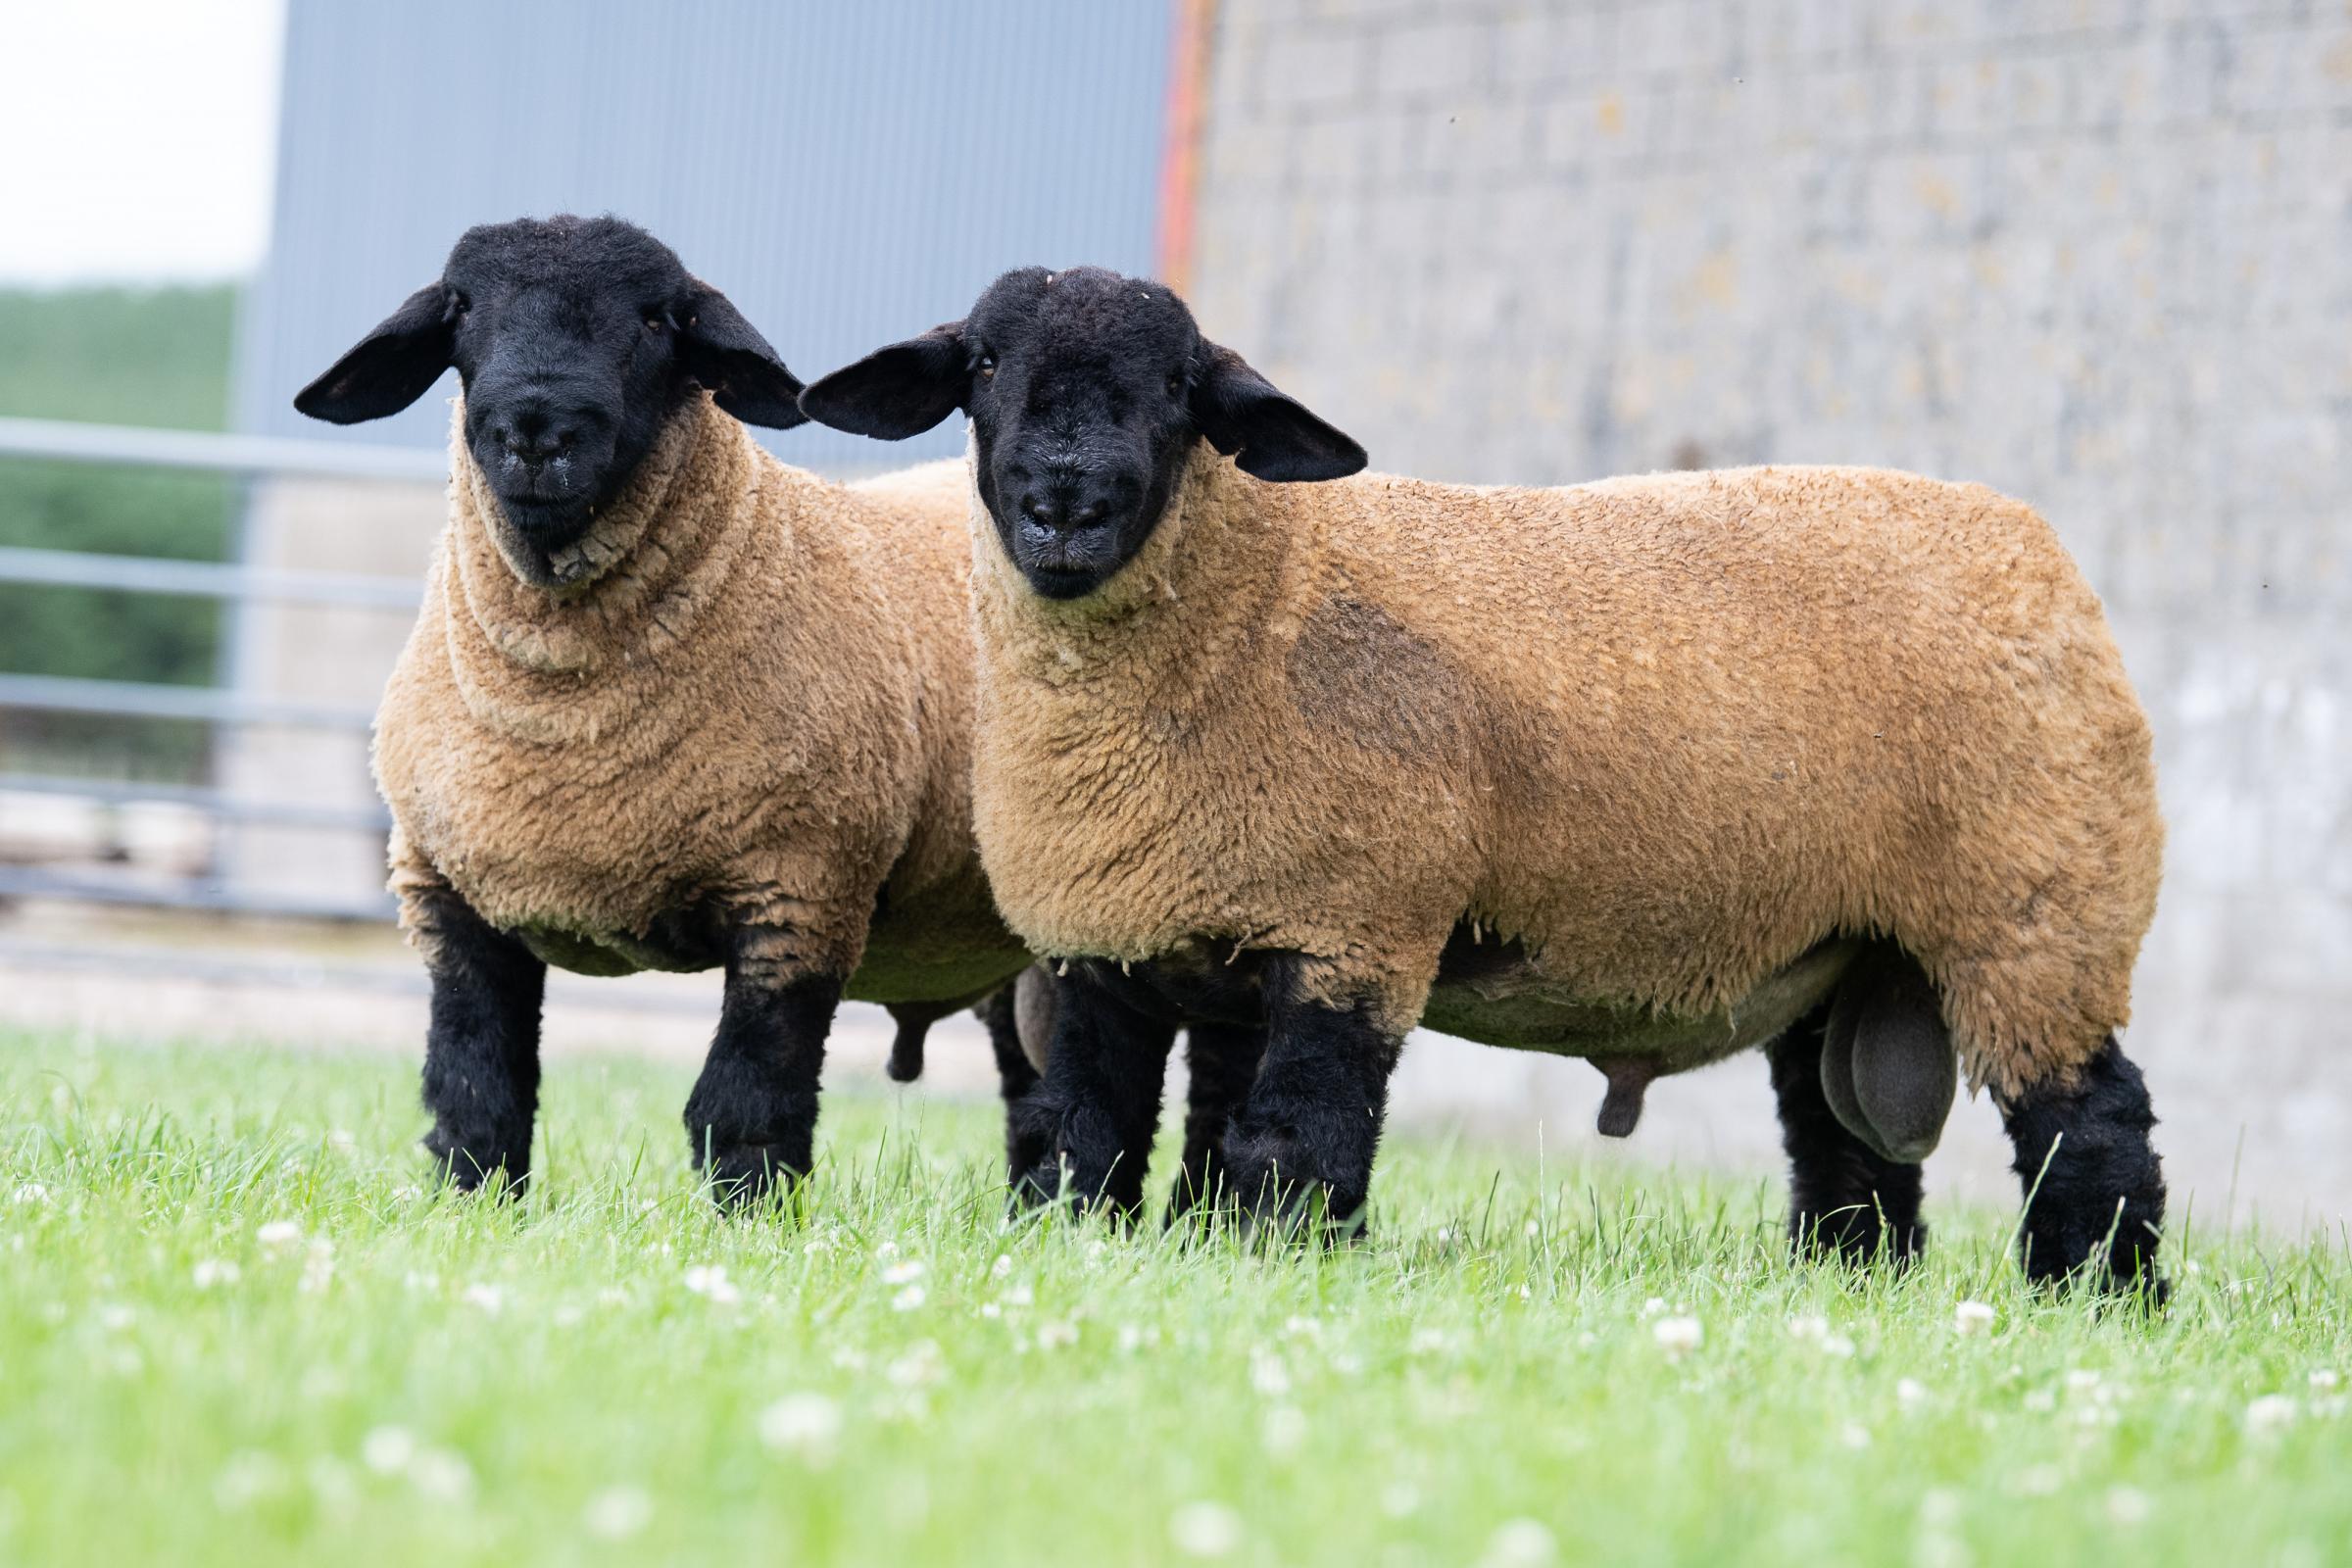 Up to 80 Suffolk ram lambs are sold every year from the flock Ref:RH080722033 Rob Haining / The Scottish Farmer...